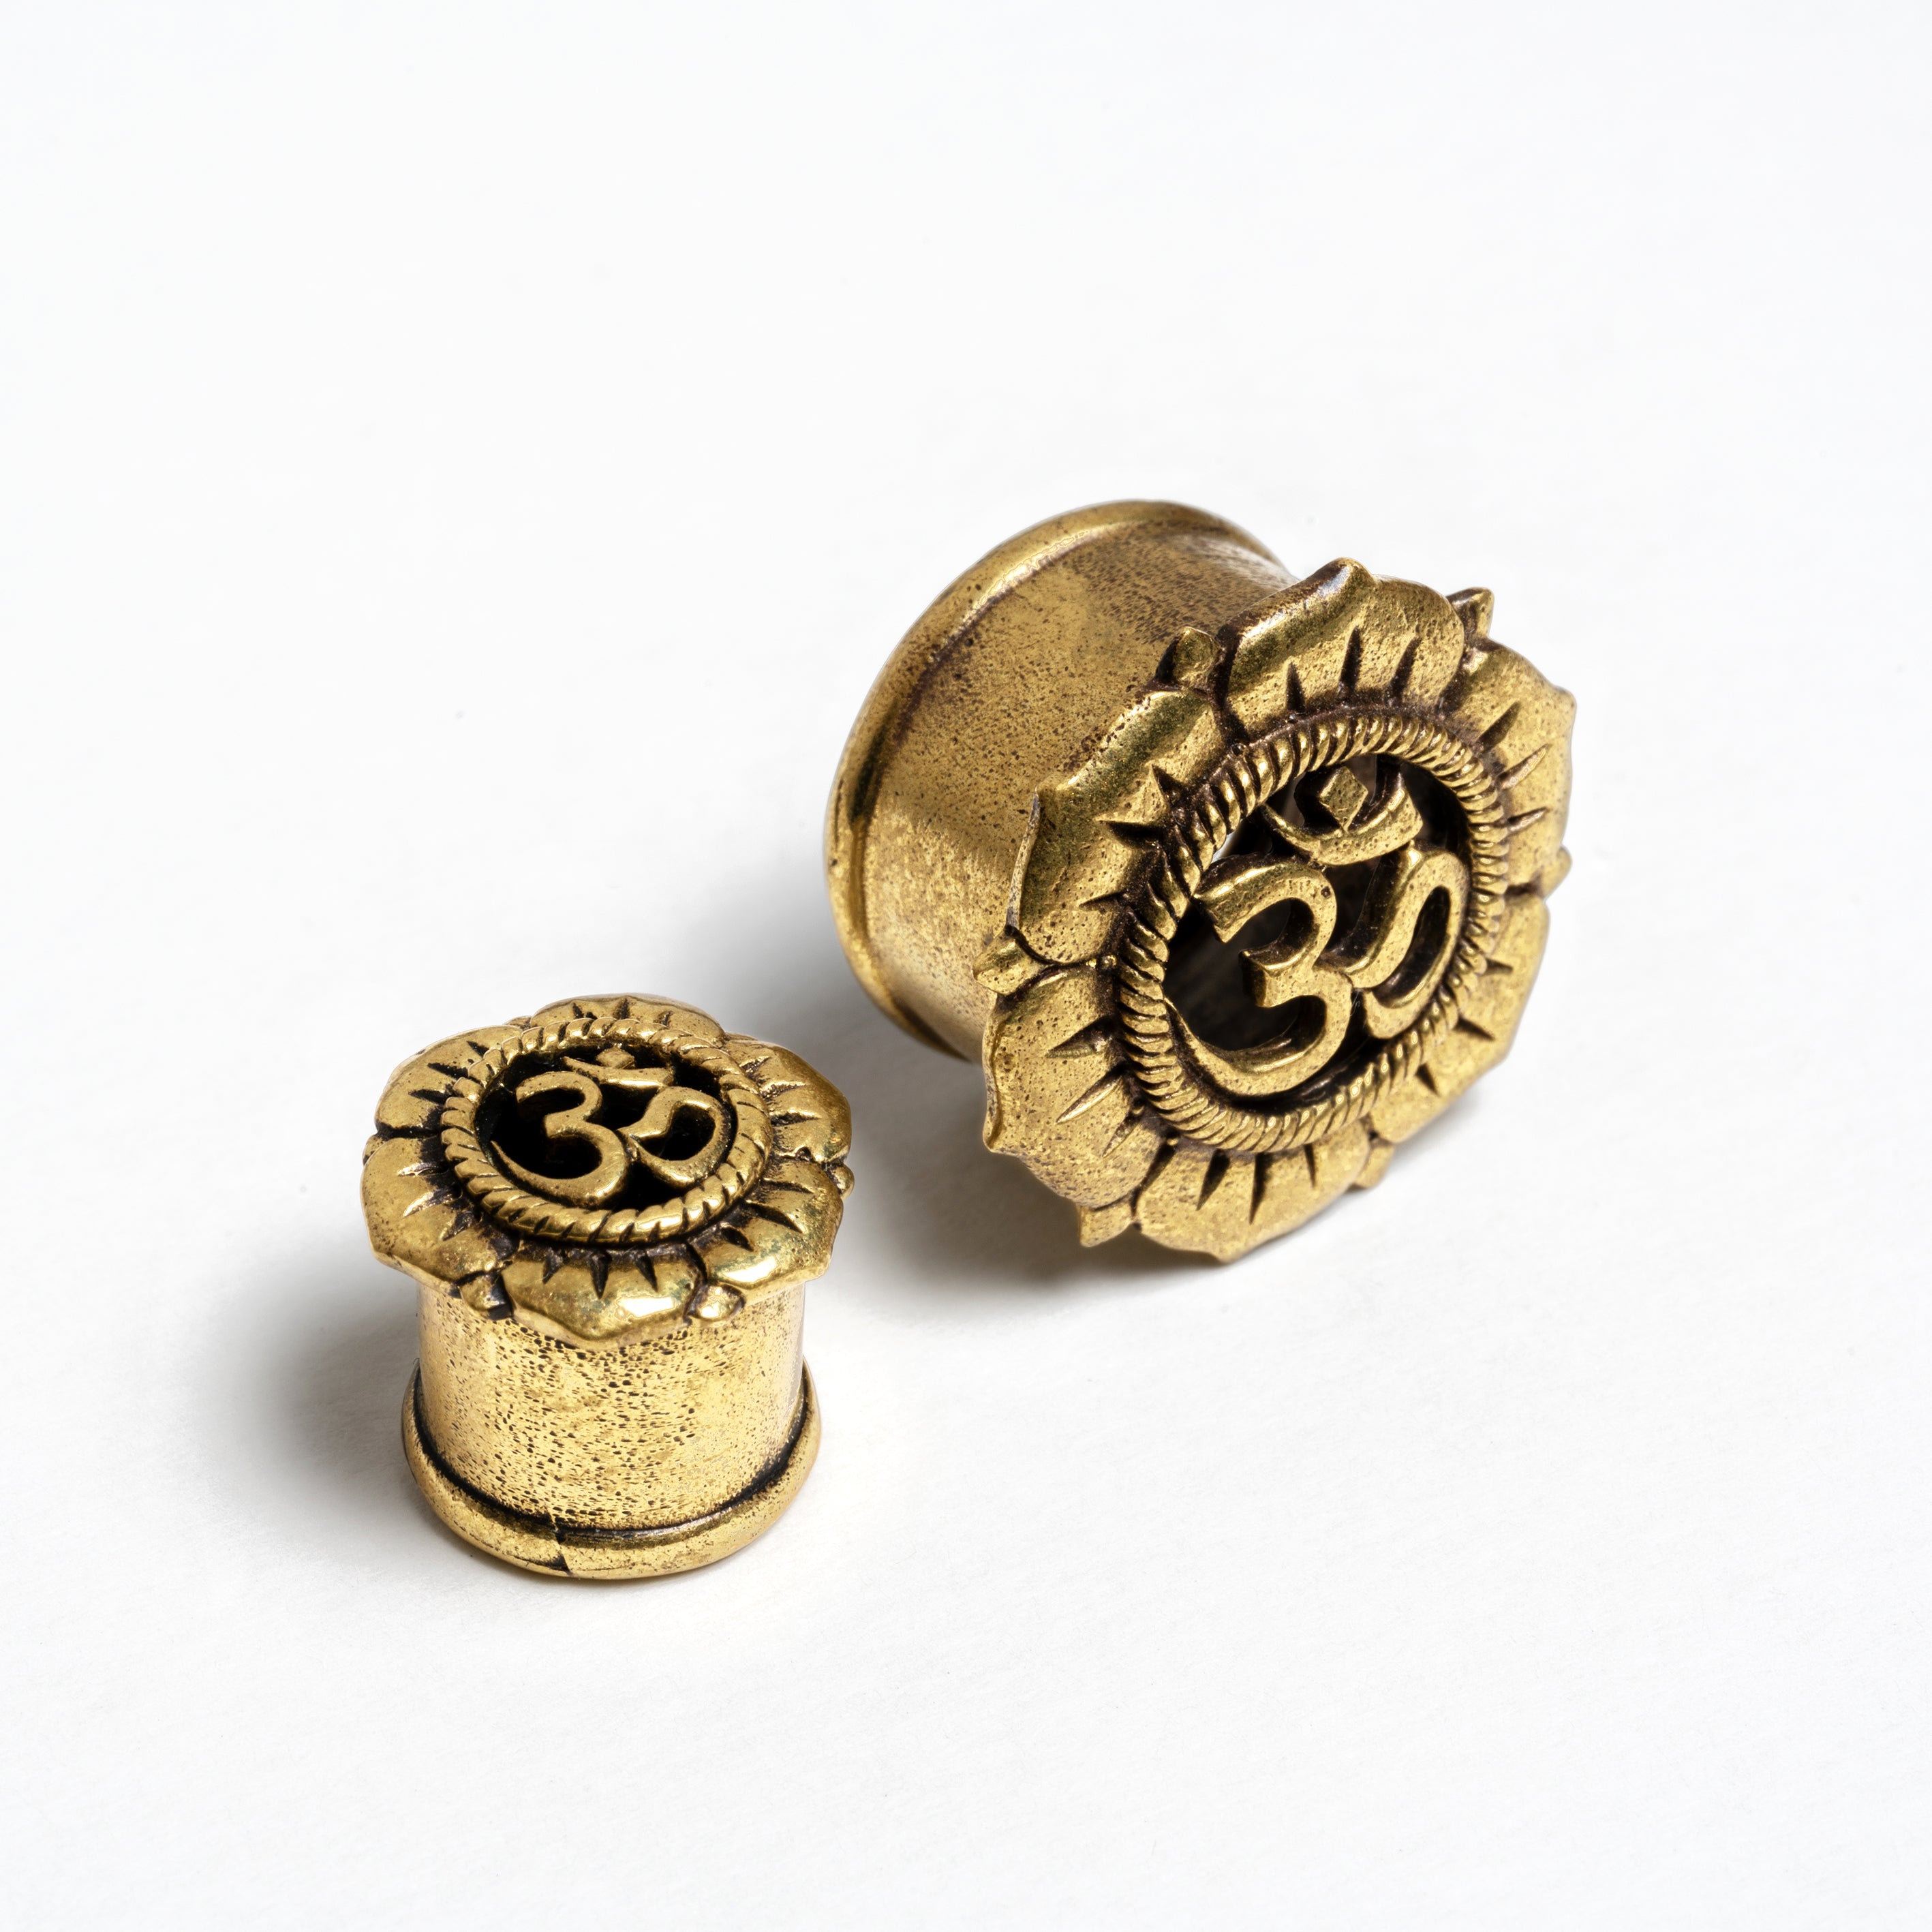 Om Lotus Flower Brass Ear Plugs frontal and sideview